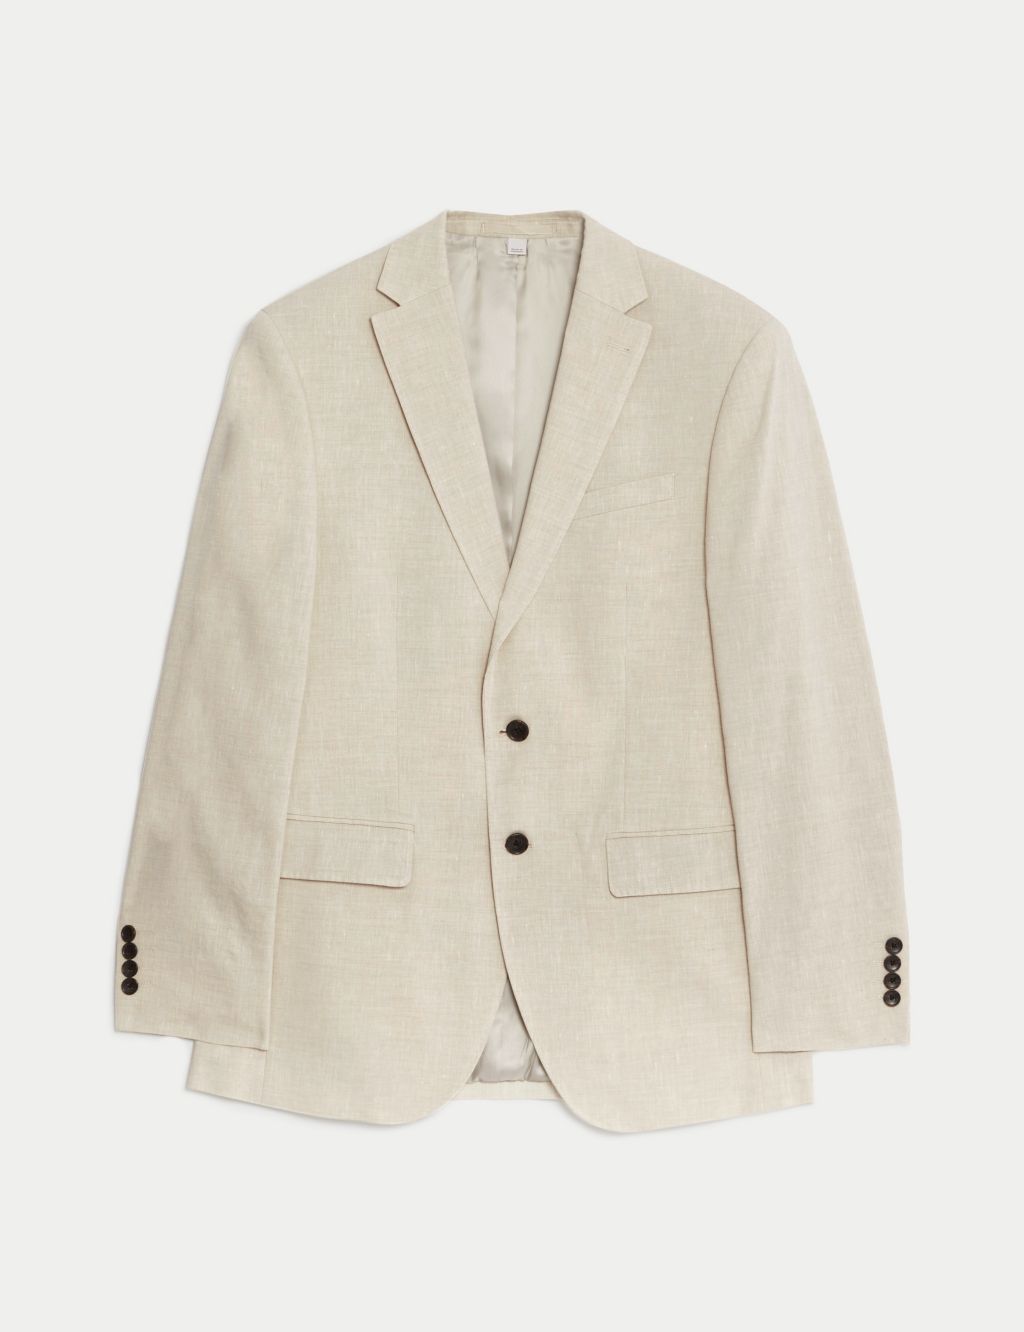 Tailored Fit Italian Linen Miracle™ Suit Jacket 1 of 7